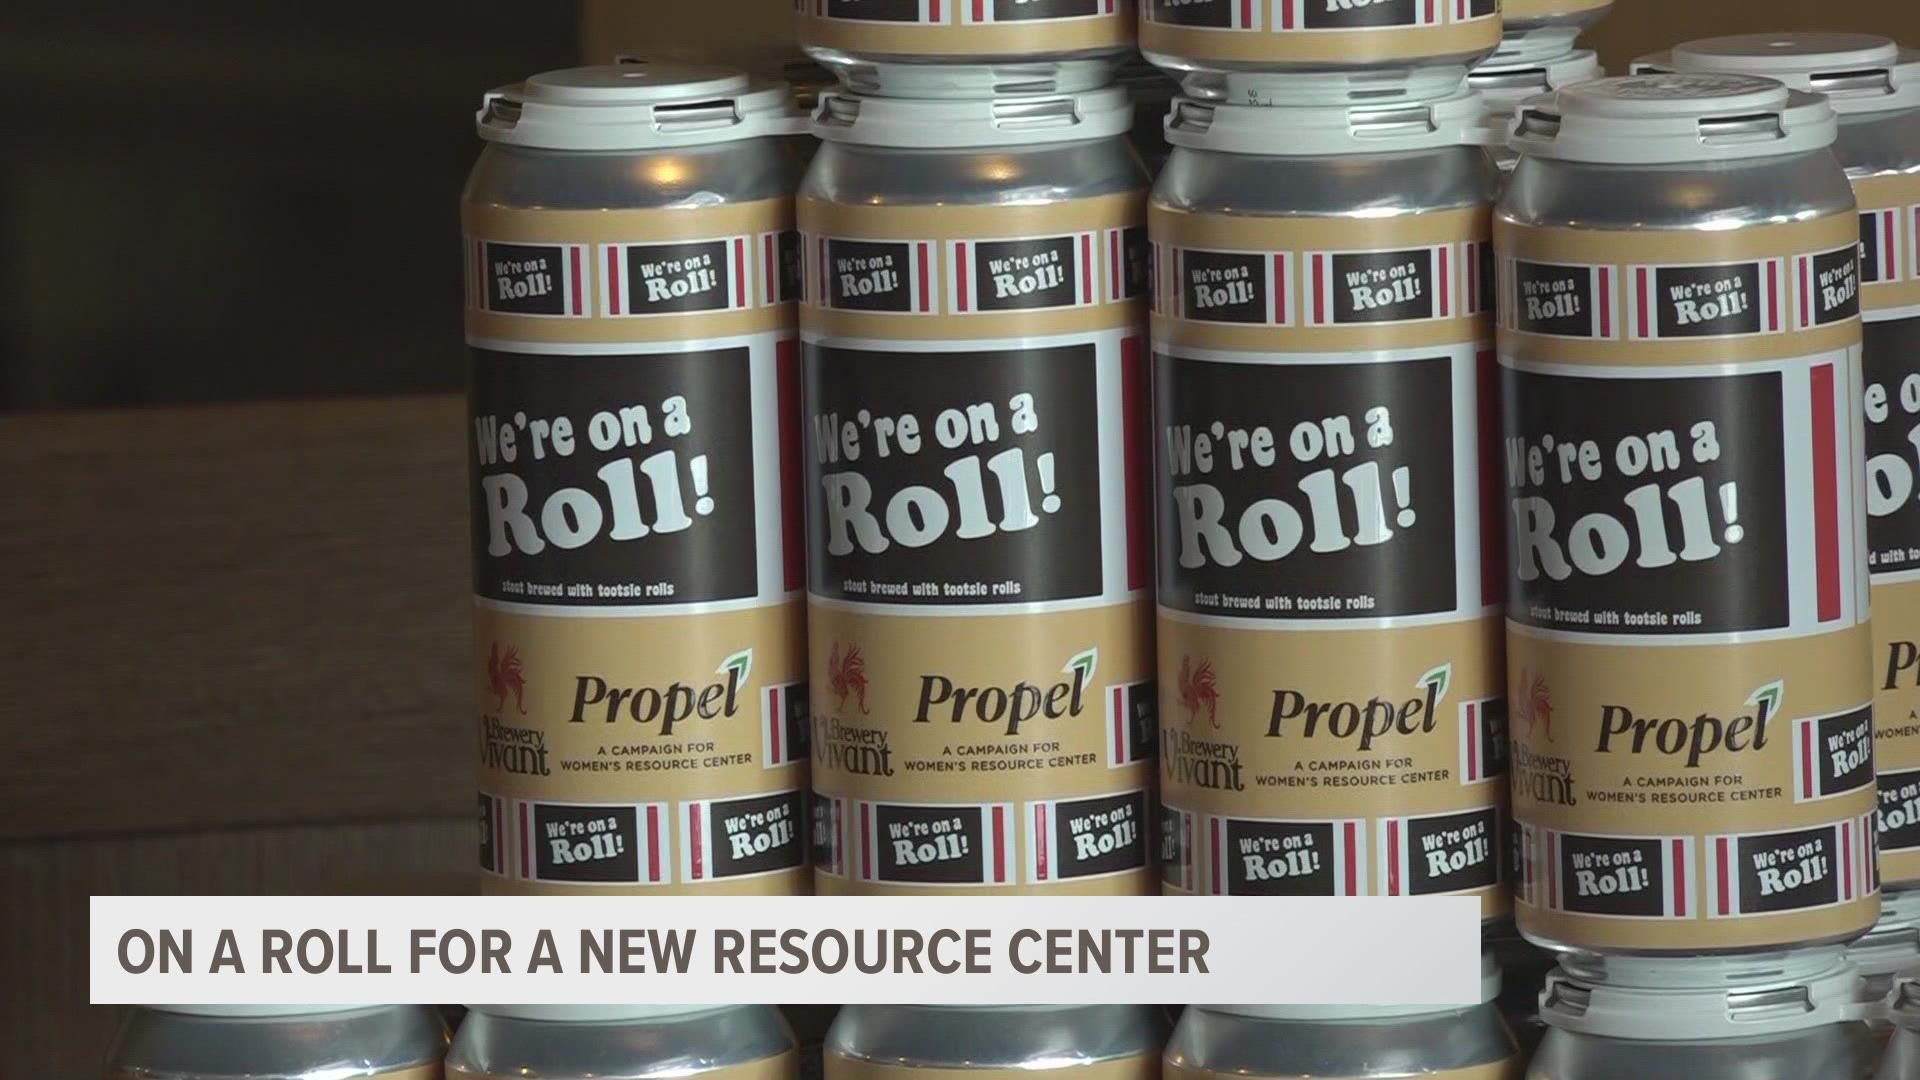 The new beer is called "We're on a Roll", a classic stout brewed with Tootsie Rolls.